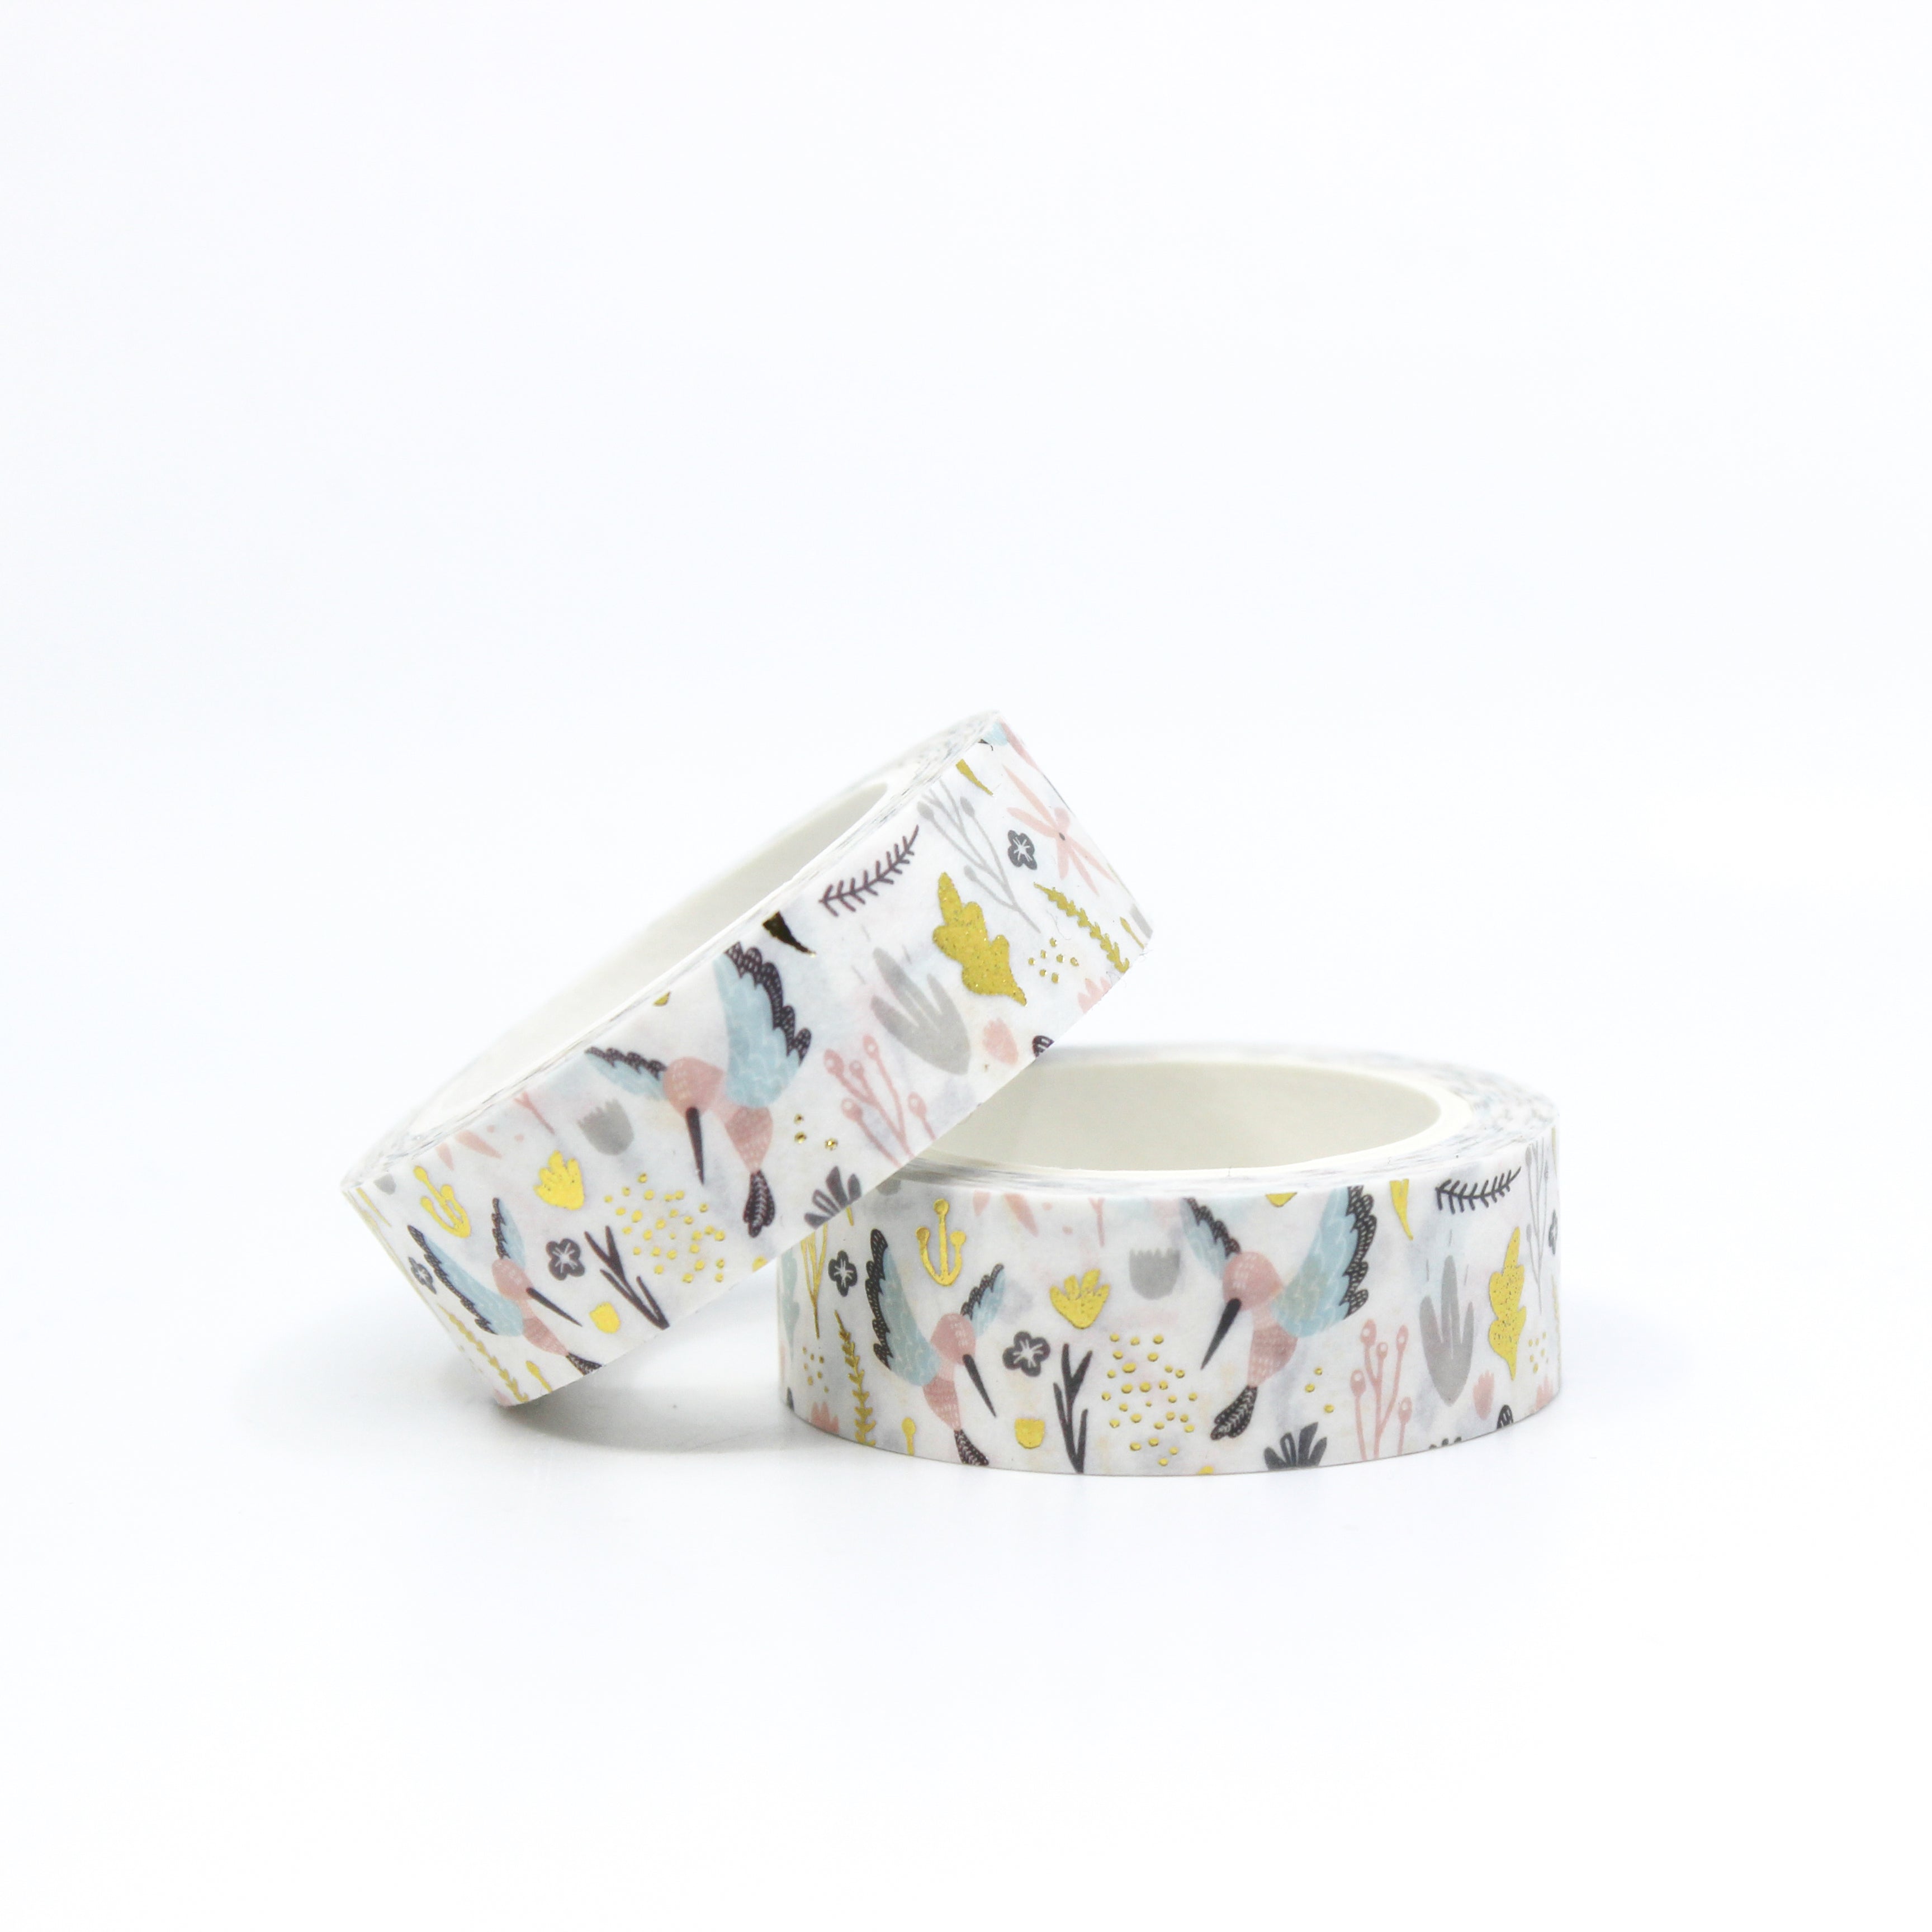 Embark on a whimsical journey with our fairytale hummingbird washi tape, featuring delicate hummingbirds amidst an enchanted backdrop of flowers and magical elements. This tape is sold at BBB Supplies Craft Shop.